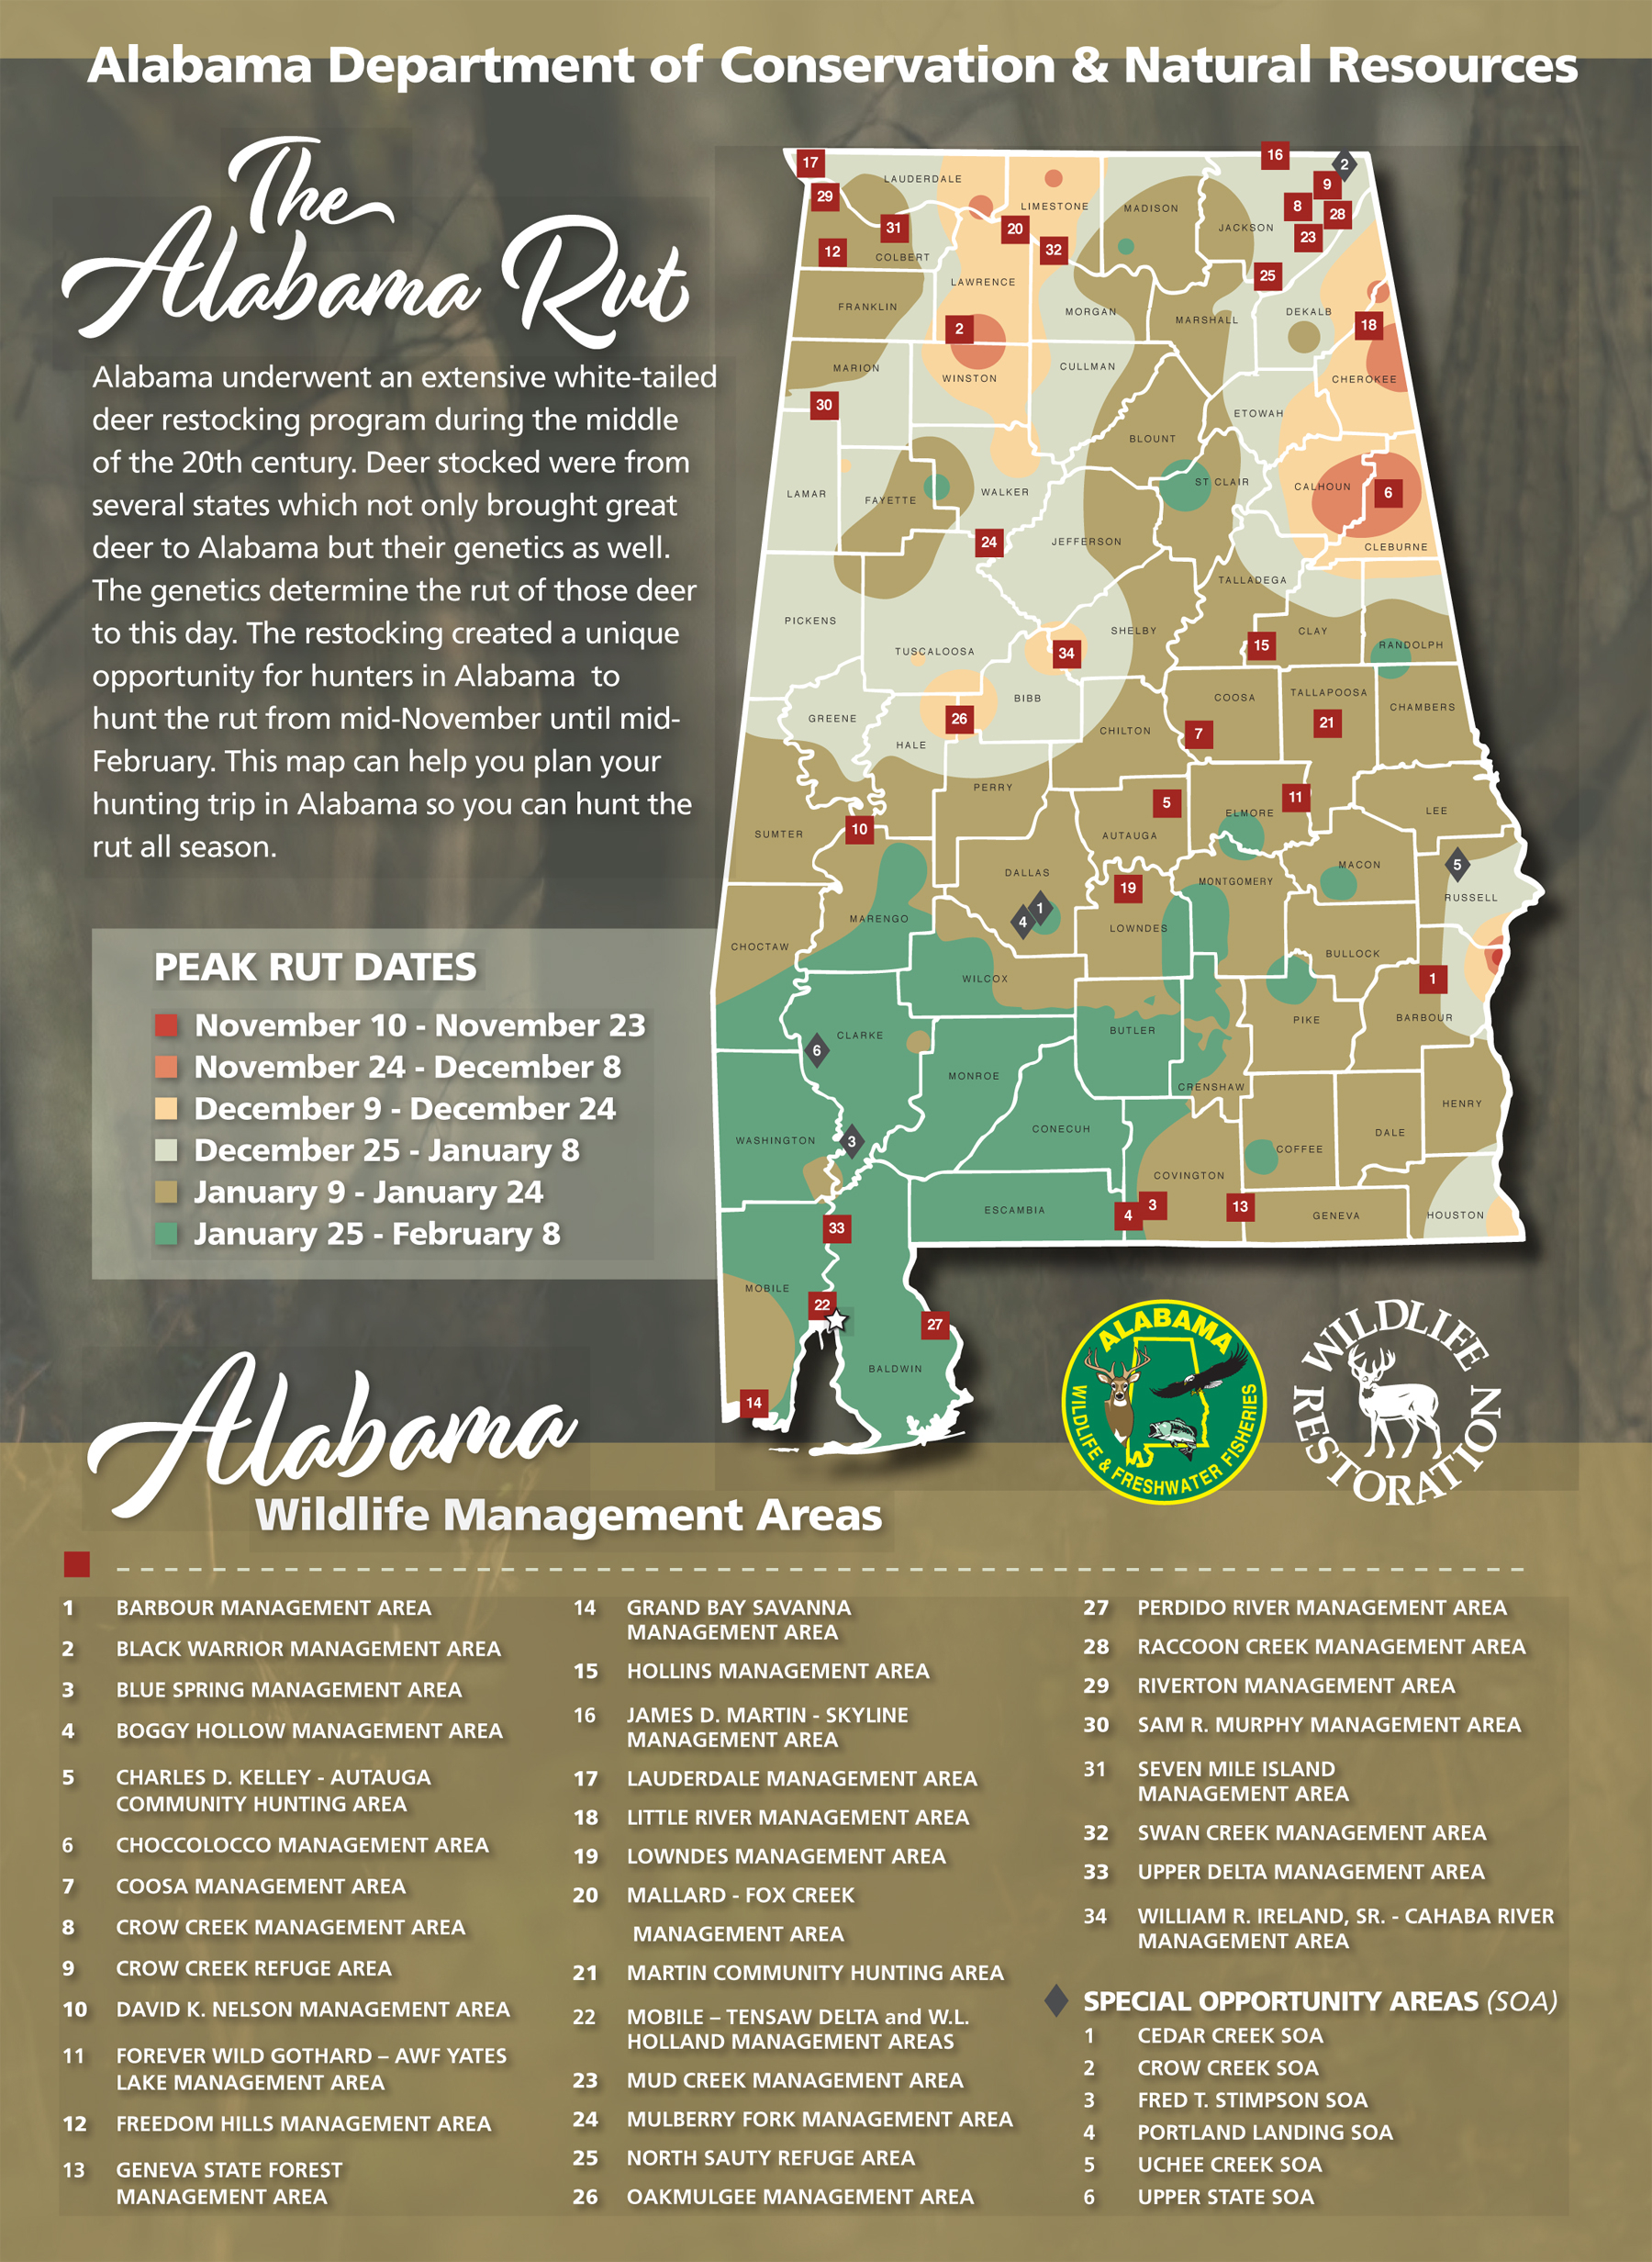 Wff's Rut Map Gives Hunters Useful Planning Tool | Outdoor